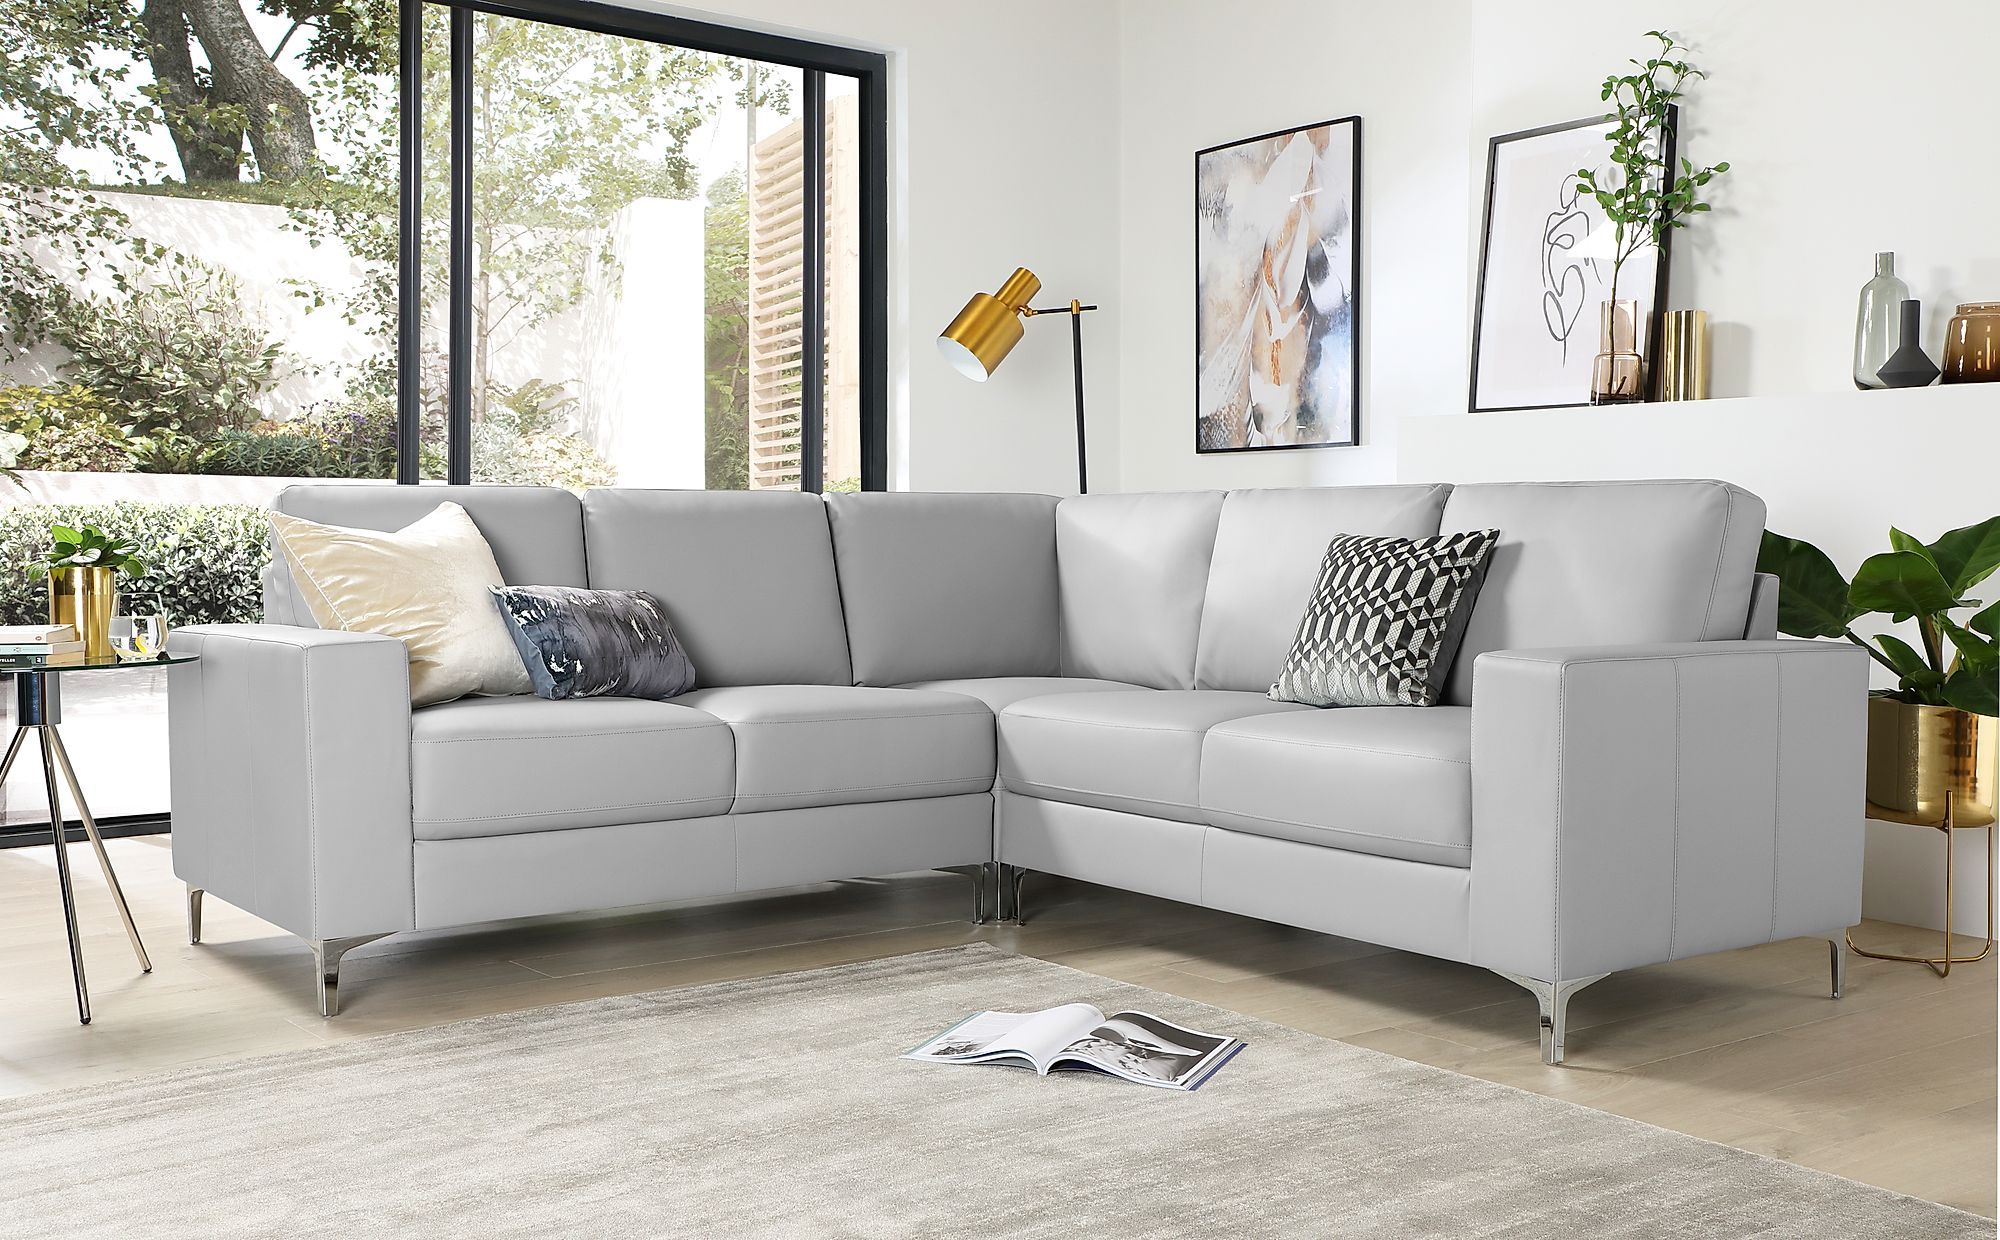 Baltimore Light Grey Leather Corner Sofa | Furniture Choice Within Sofas In Light Gray (Gallery 15 of 22)